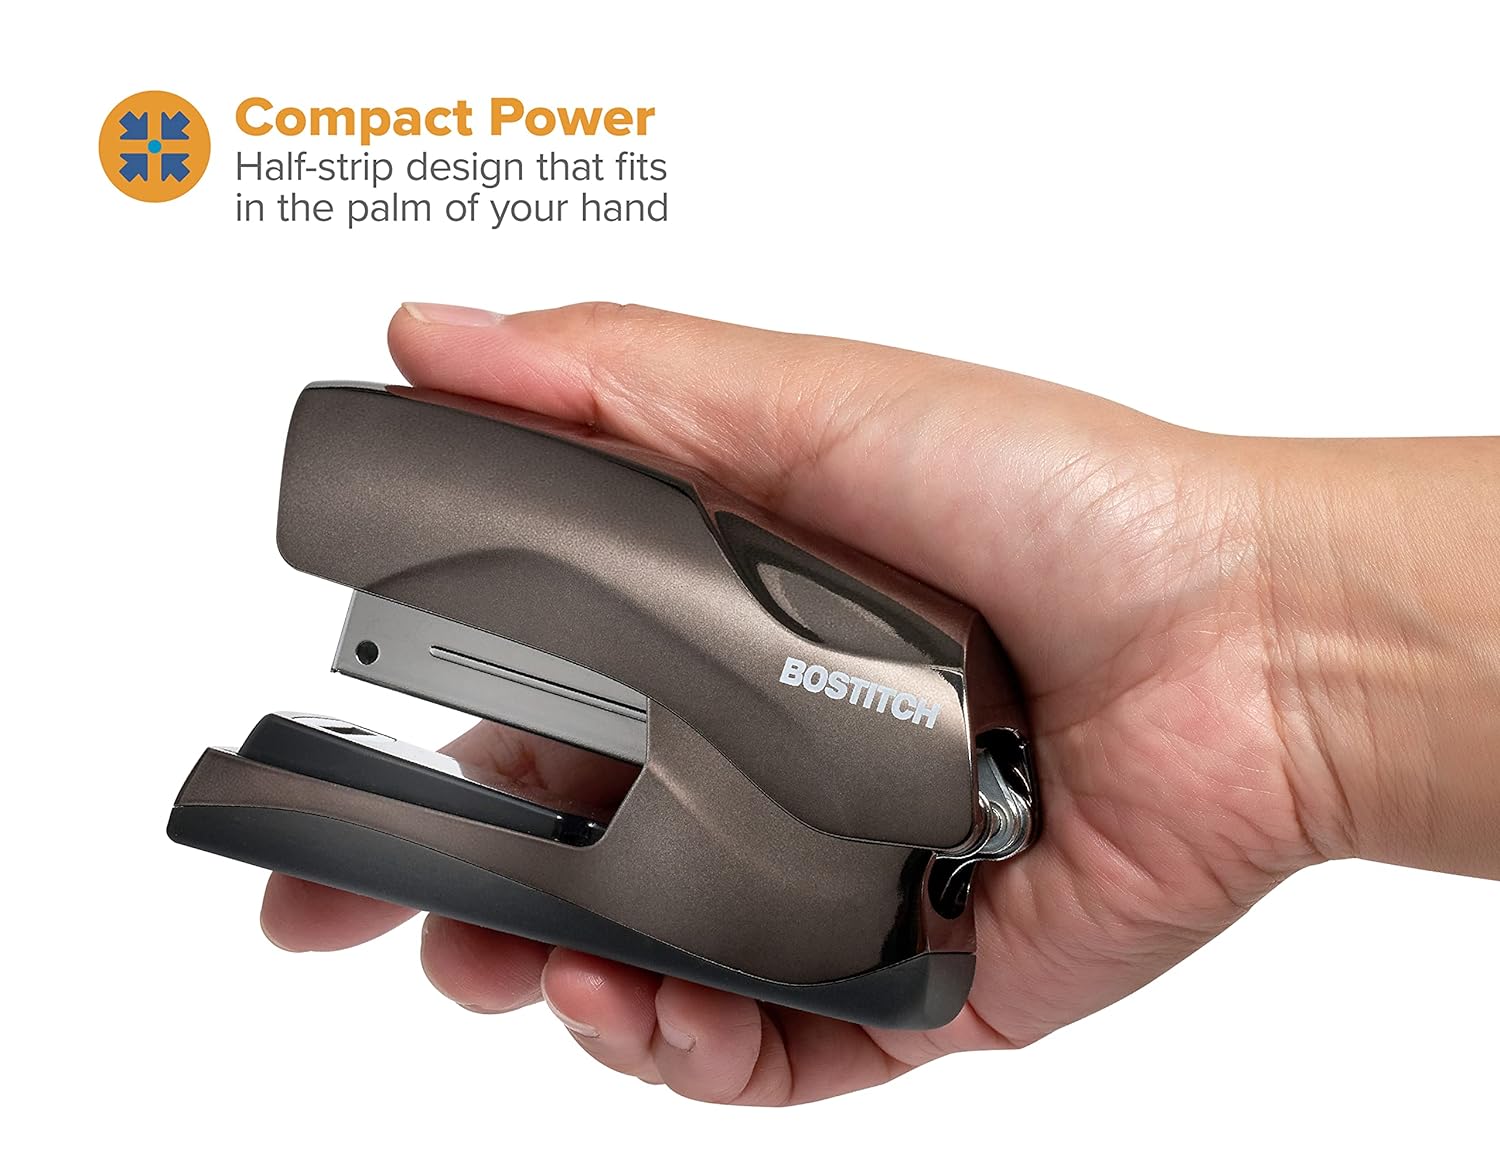 Bostitch Office Heavy Duty 40 Sheet Stapler, Small Stapler Size, Fits into The Palm of Your Hand, Black Chrome